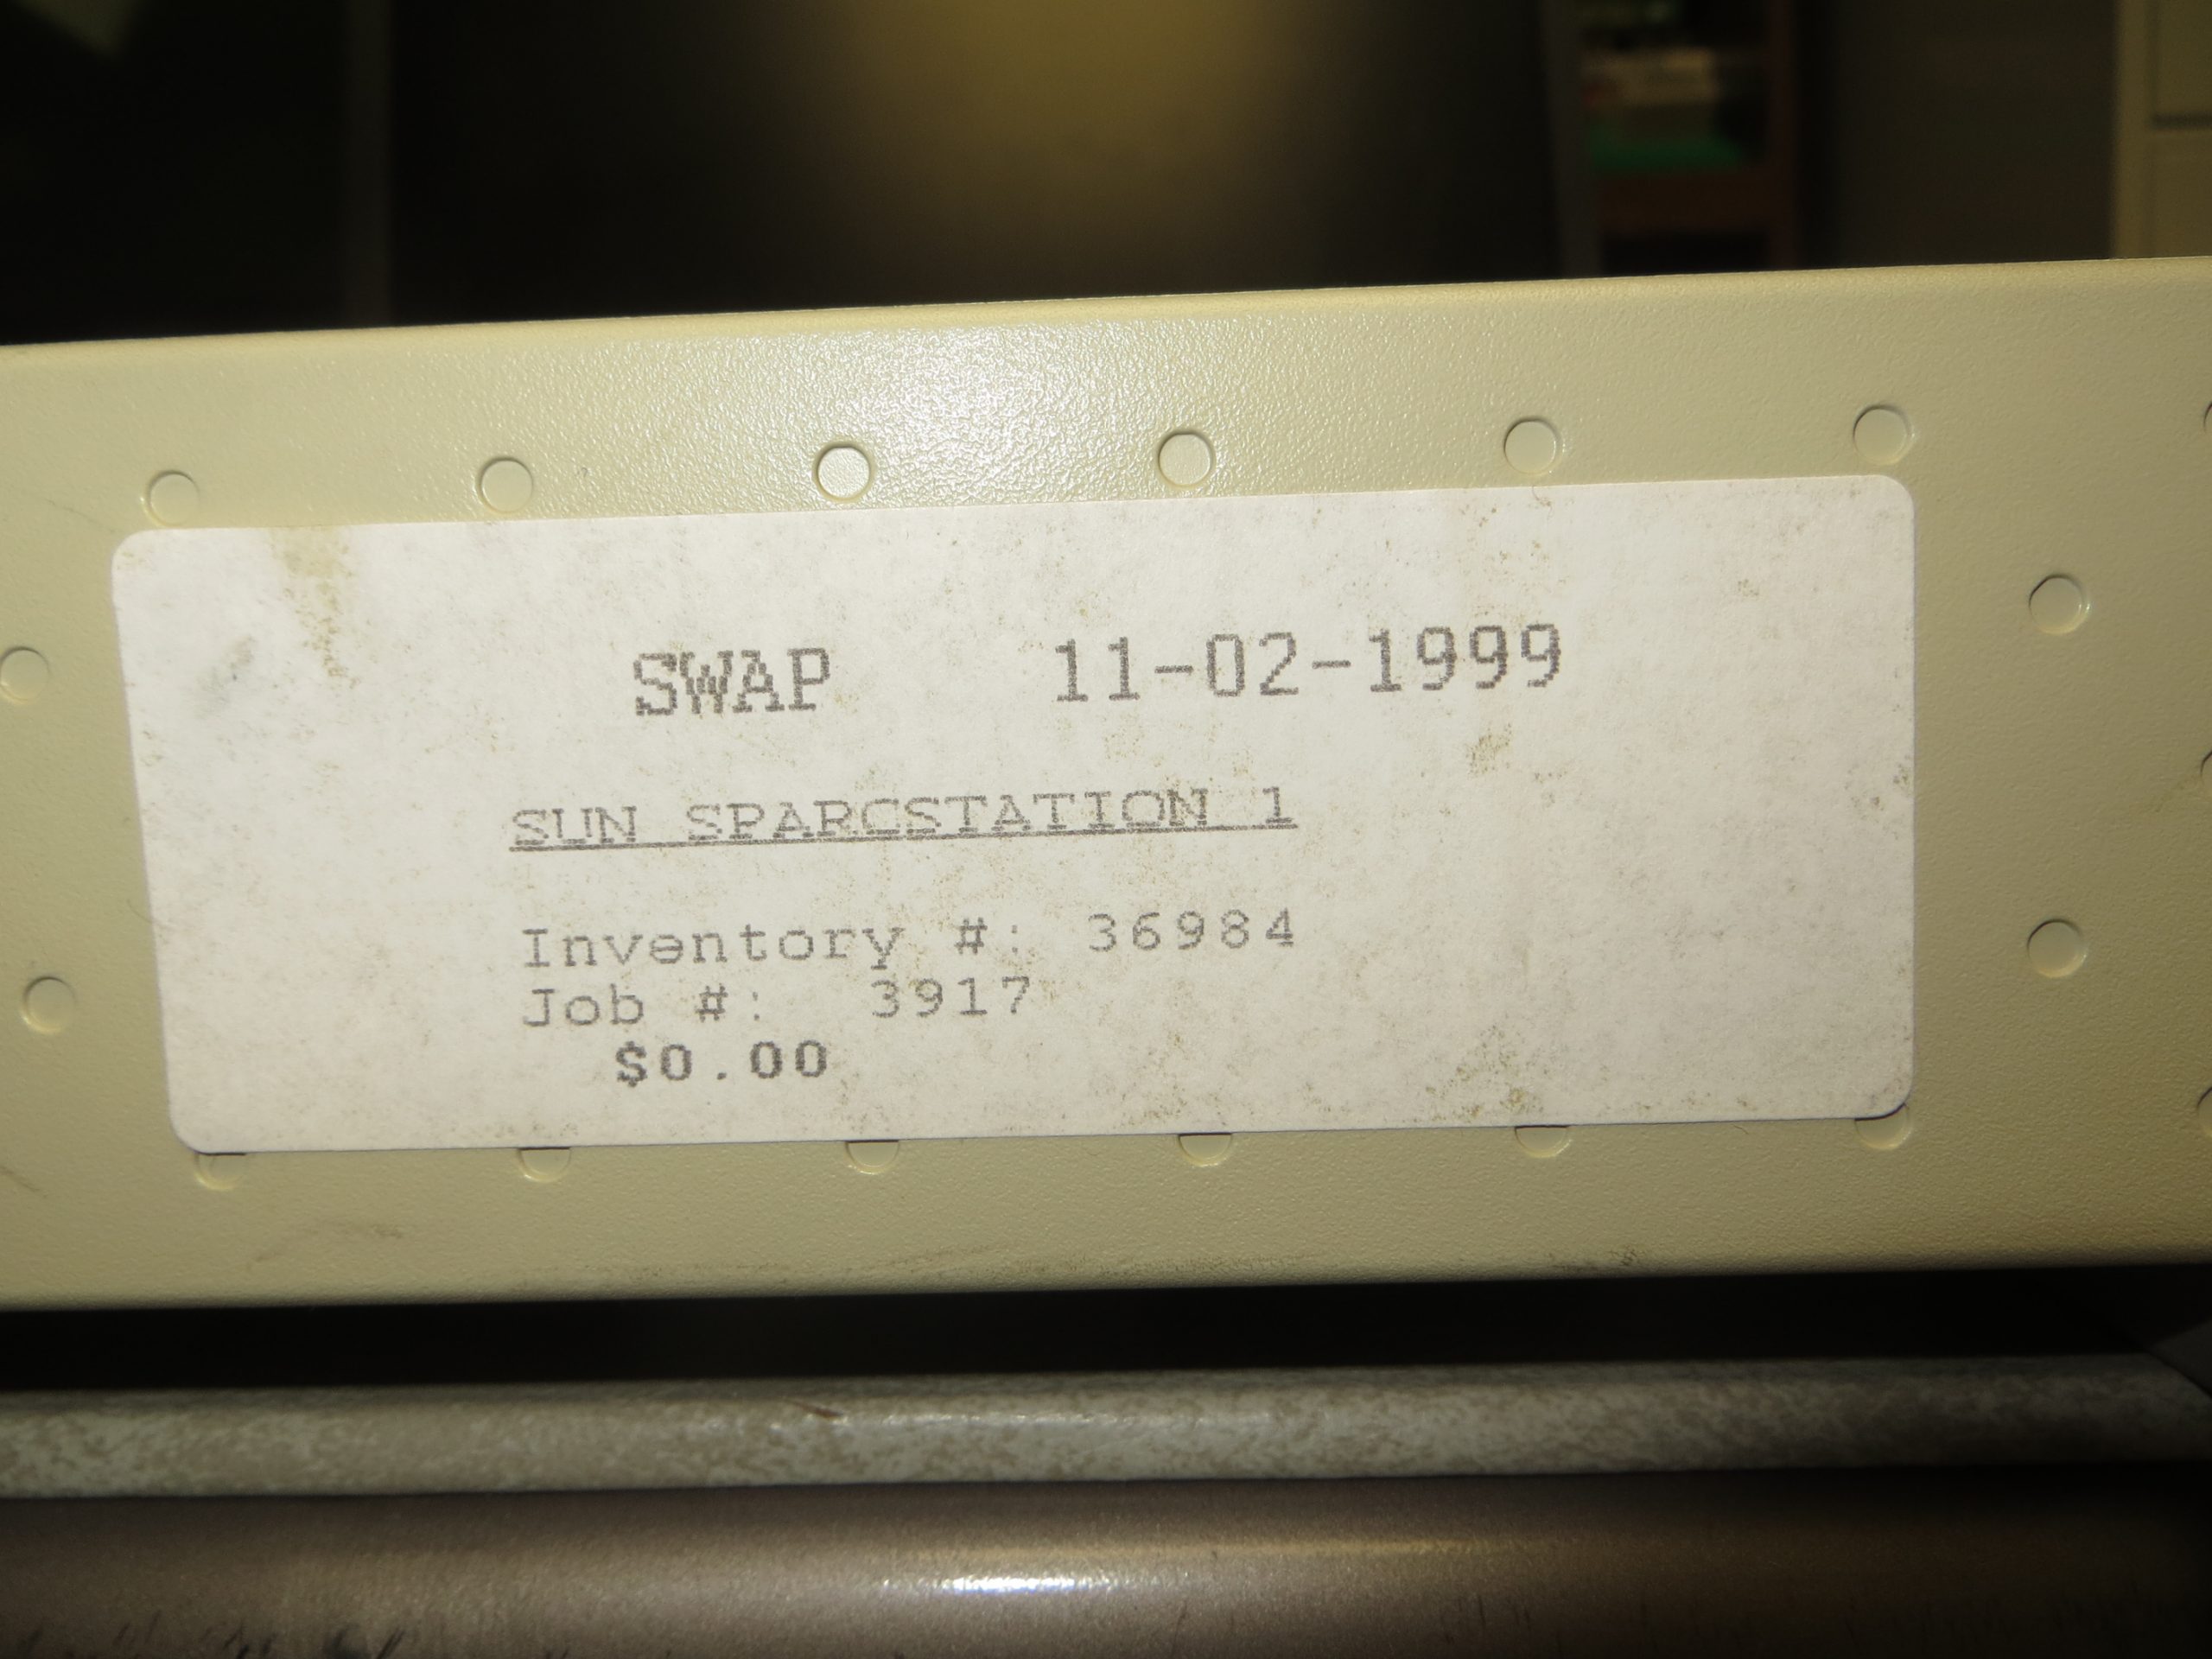 The SWAP surplus price sticker - I actually paid something for the privilege of owning this system.